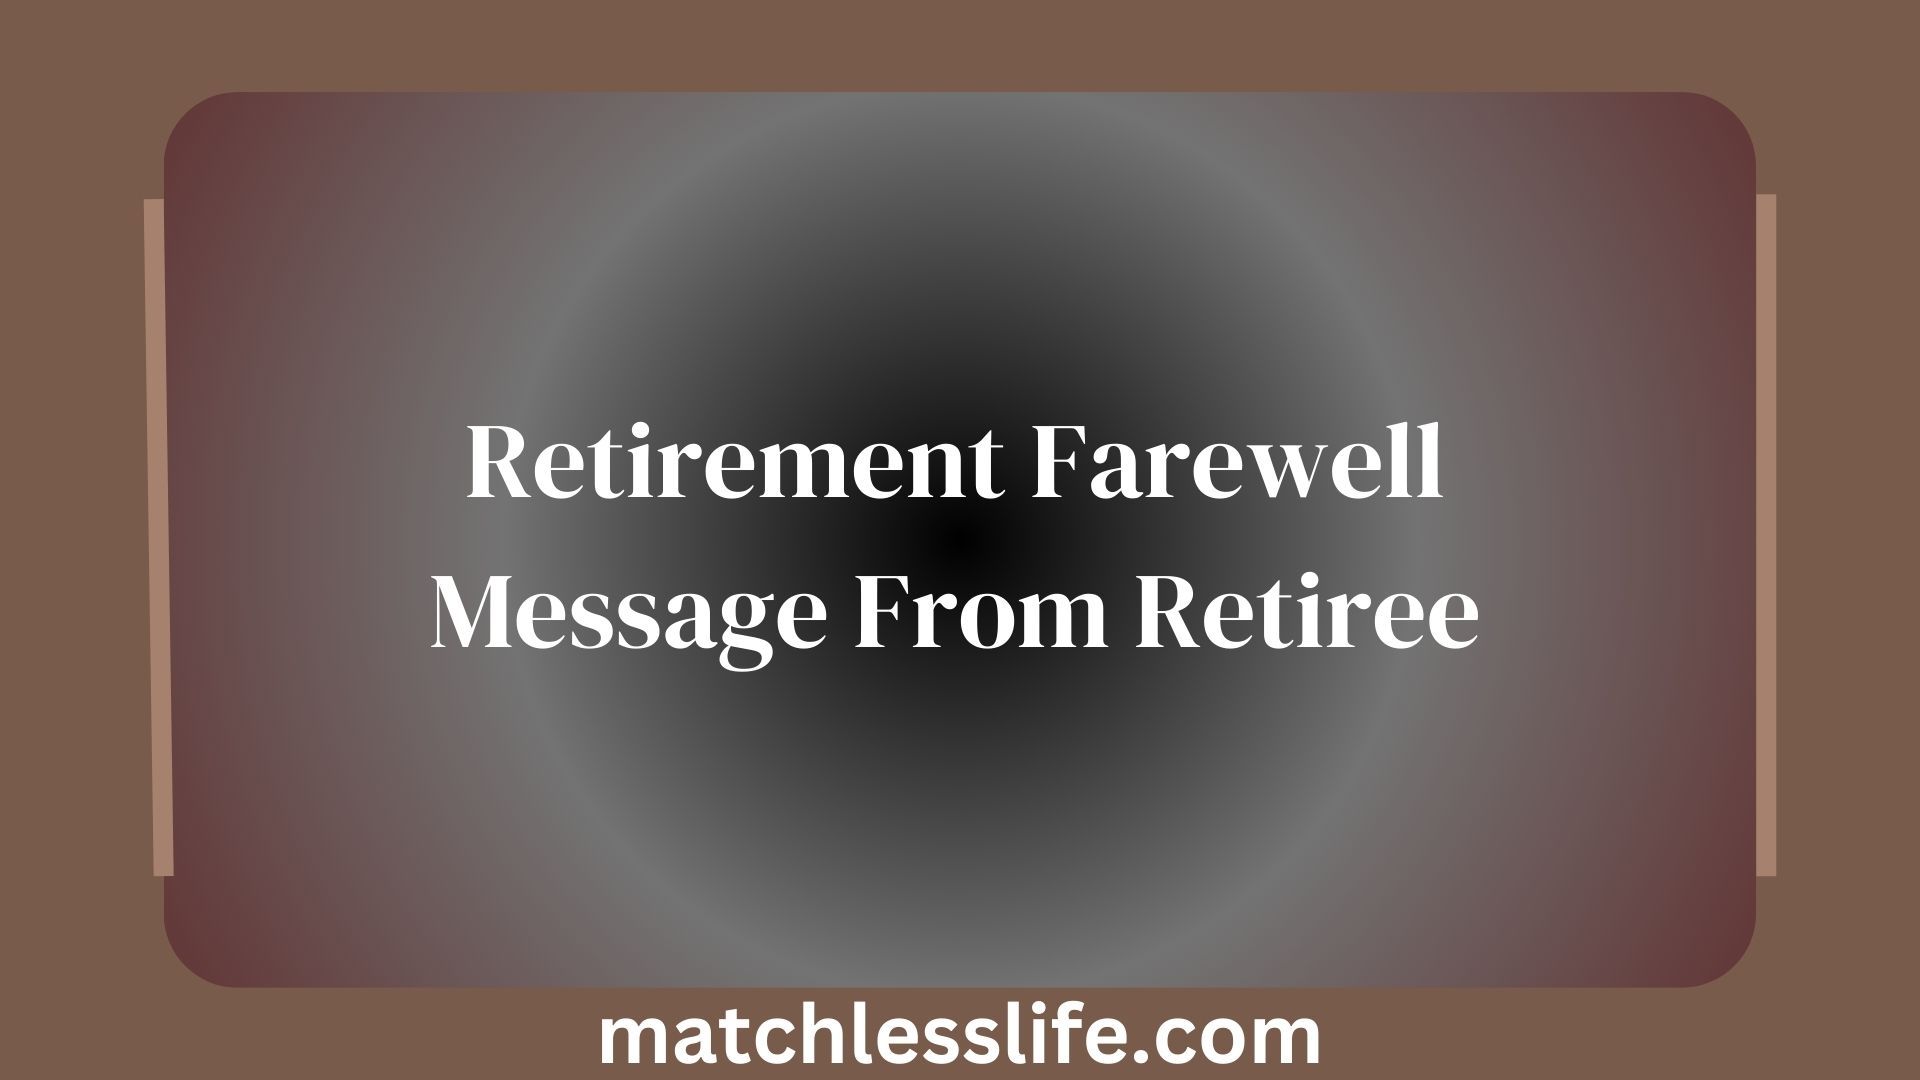 Retirement Farewell Message From Retiree